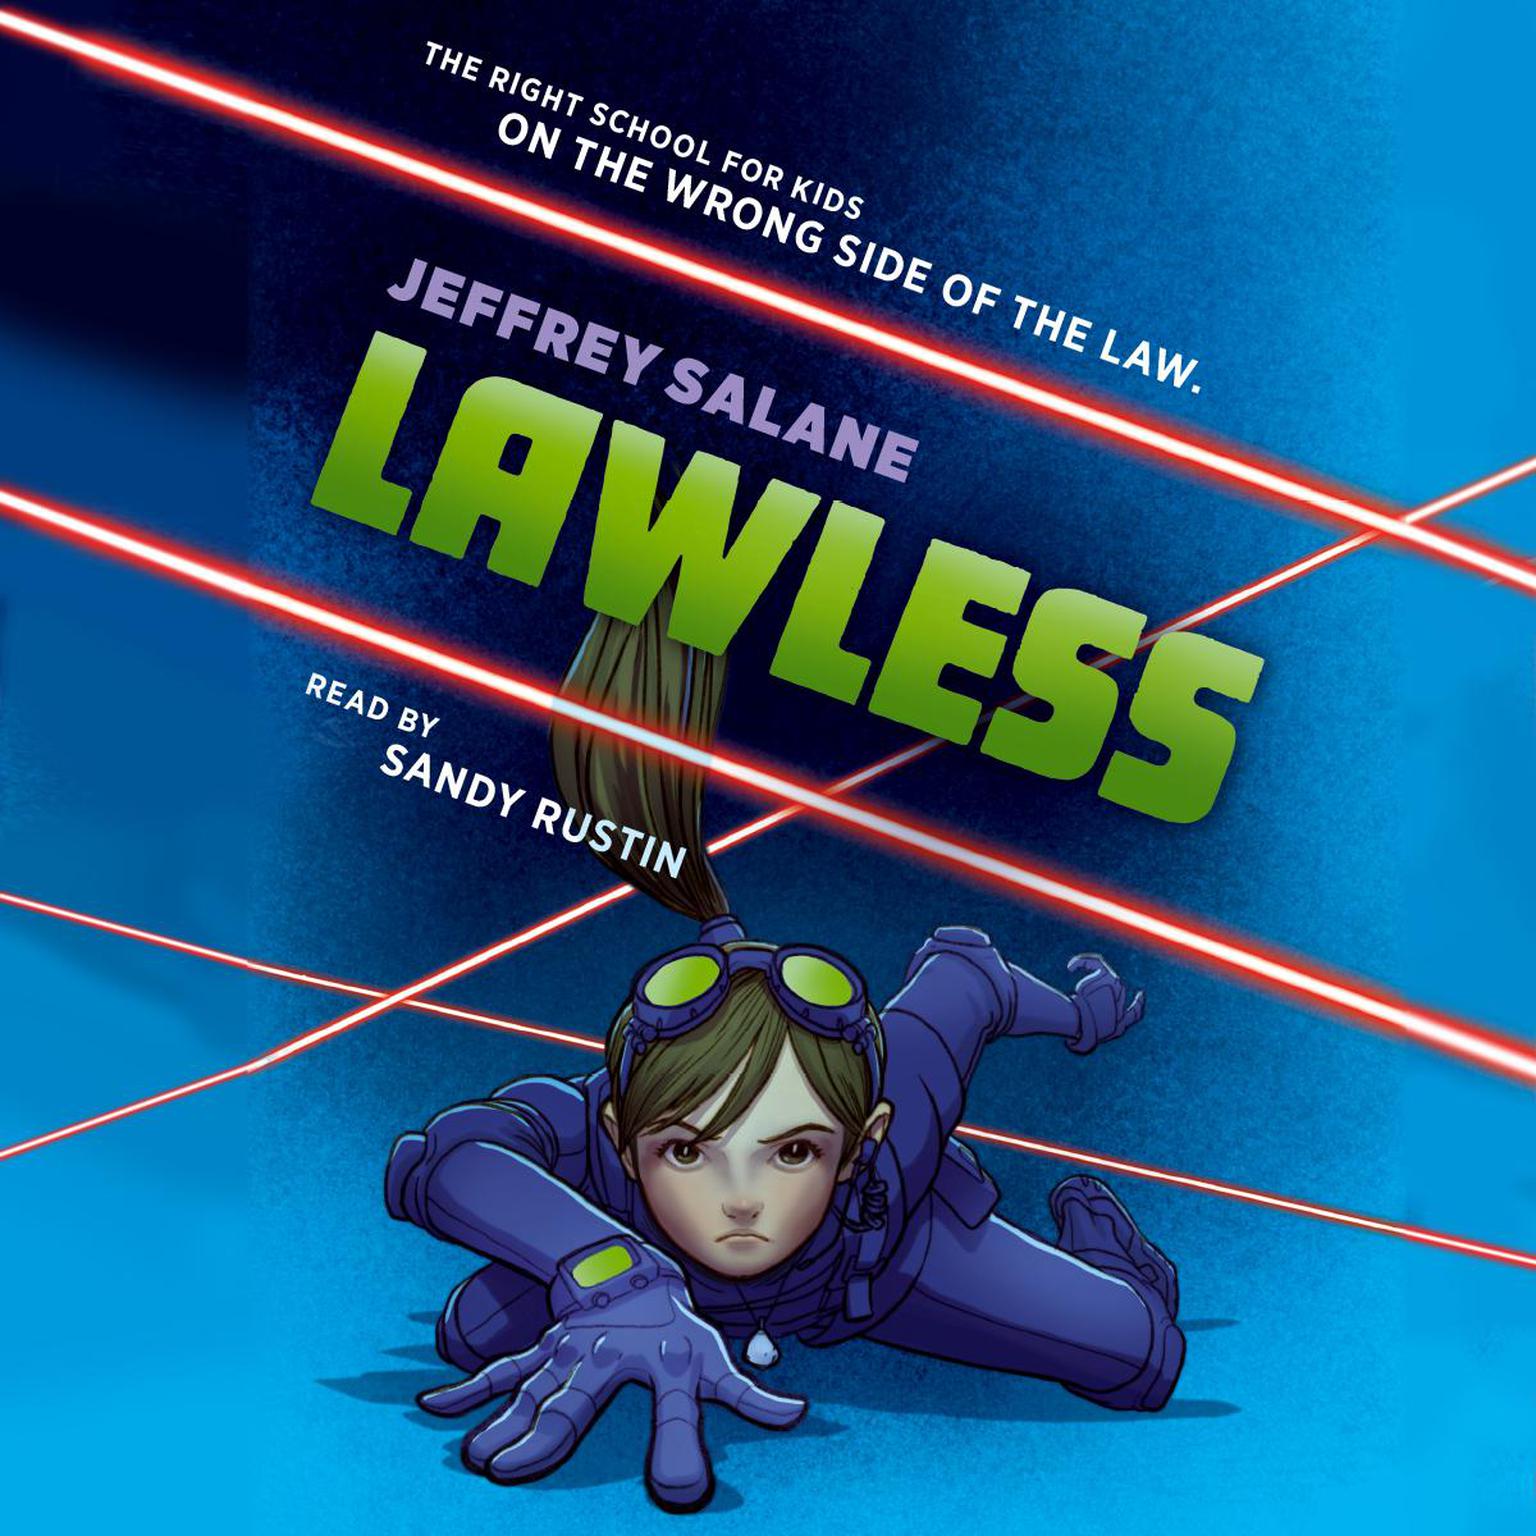 Lawless (The Lawless Trilogy, Book 1) Audiobook, by Jeffrey Salane